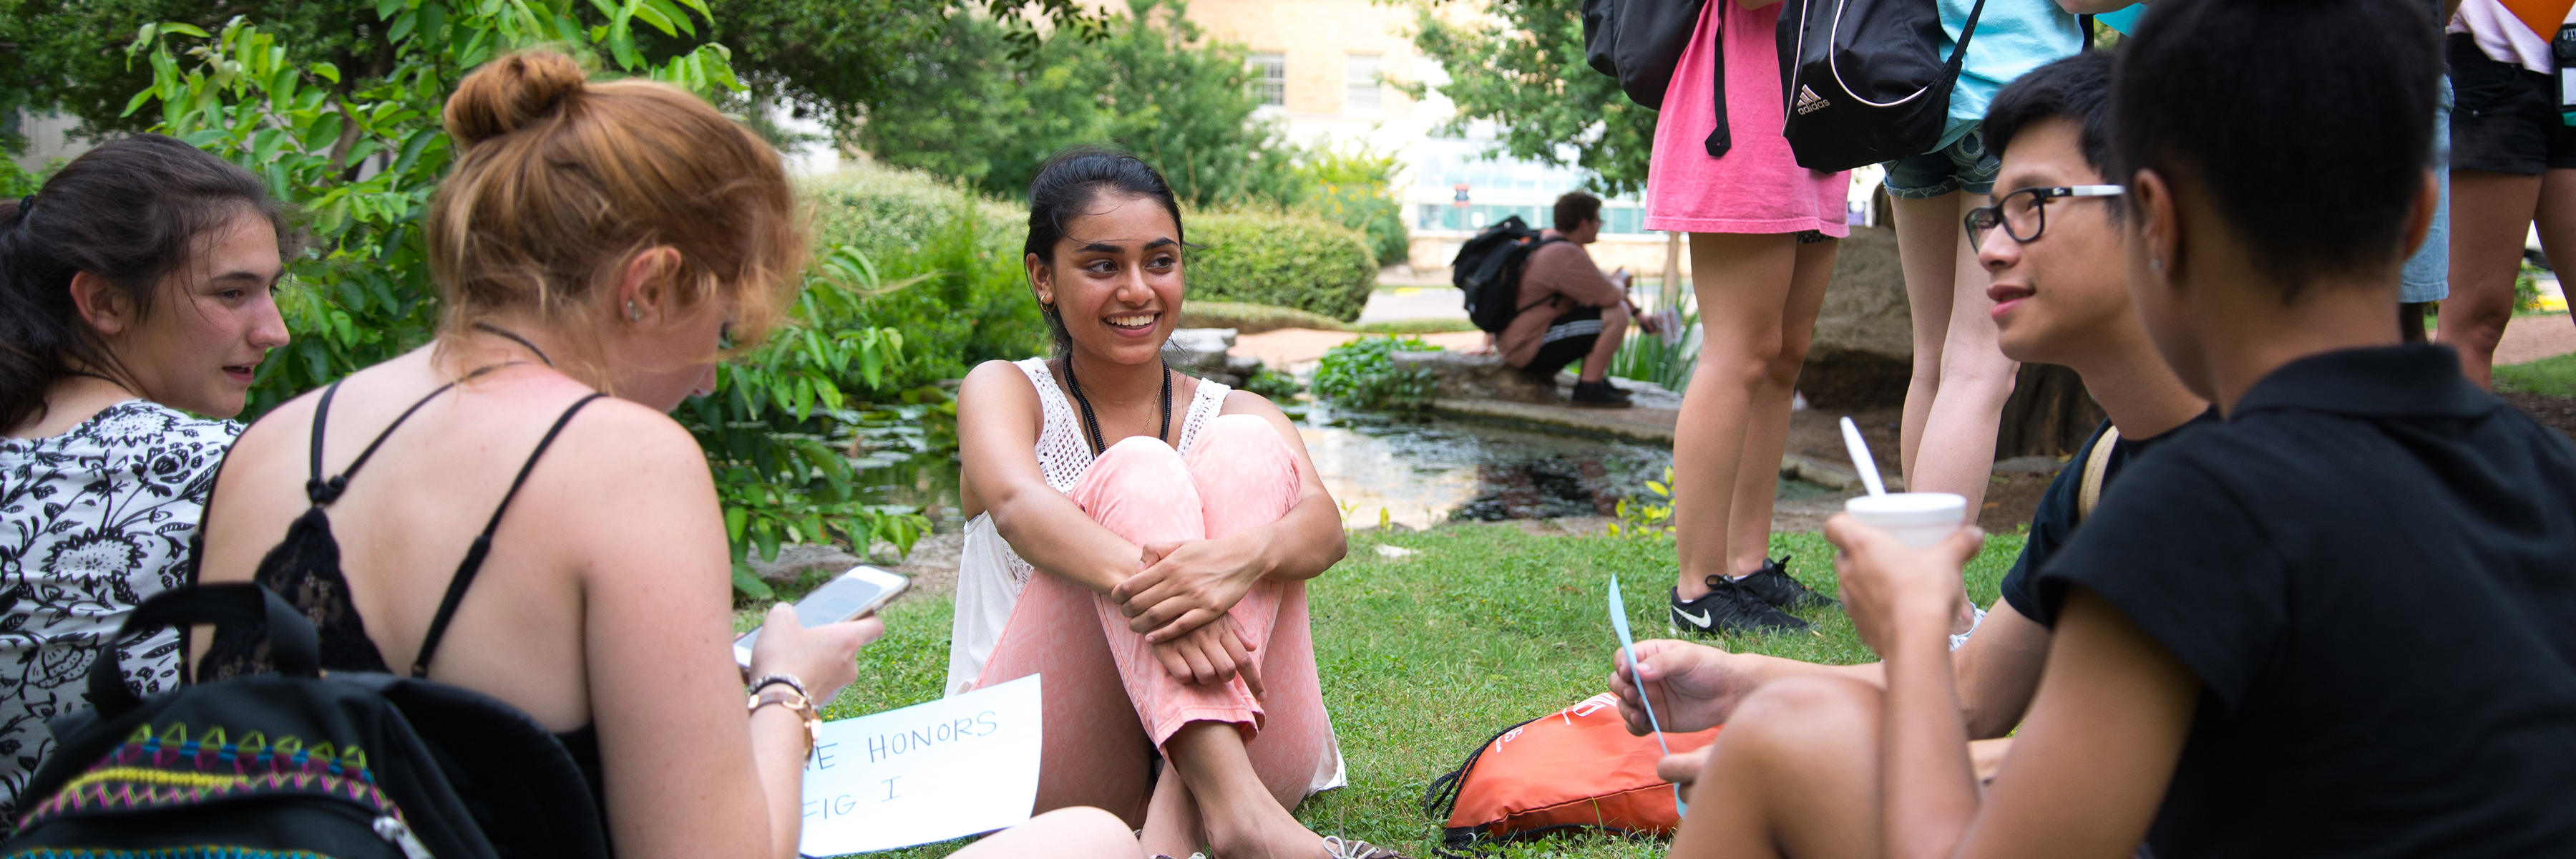 Students sit on grass next to the UT turtle pond.